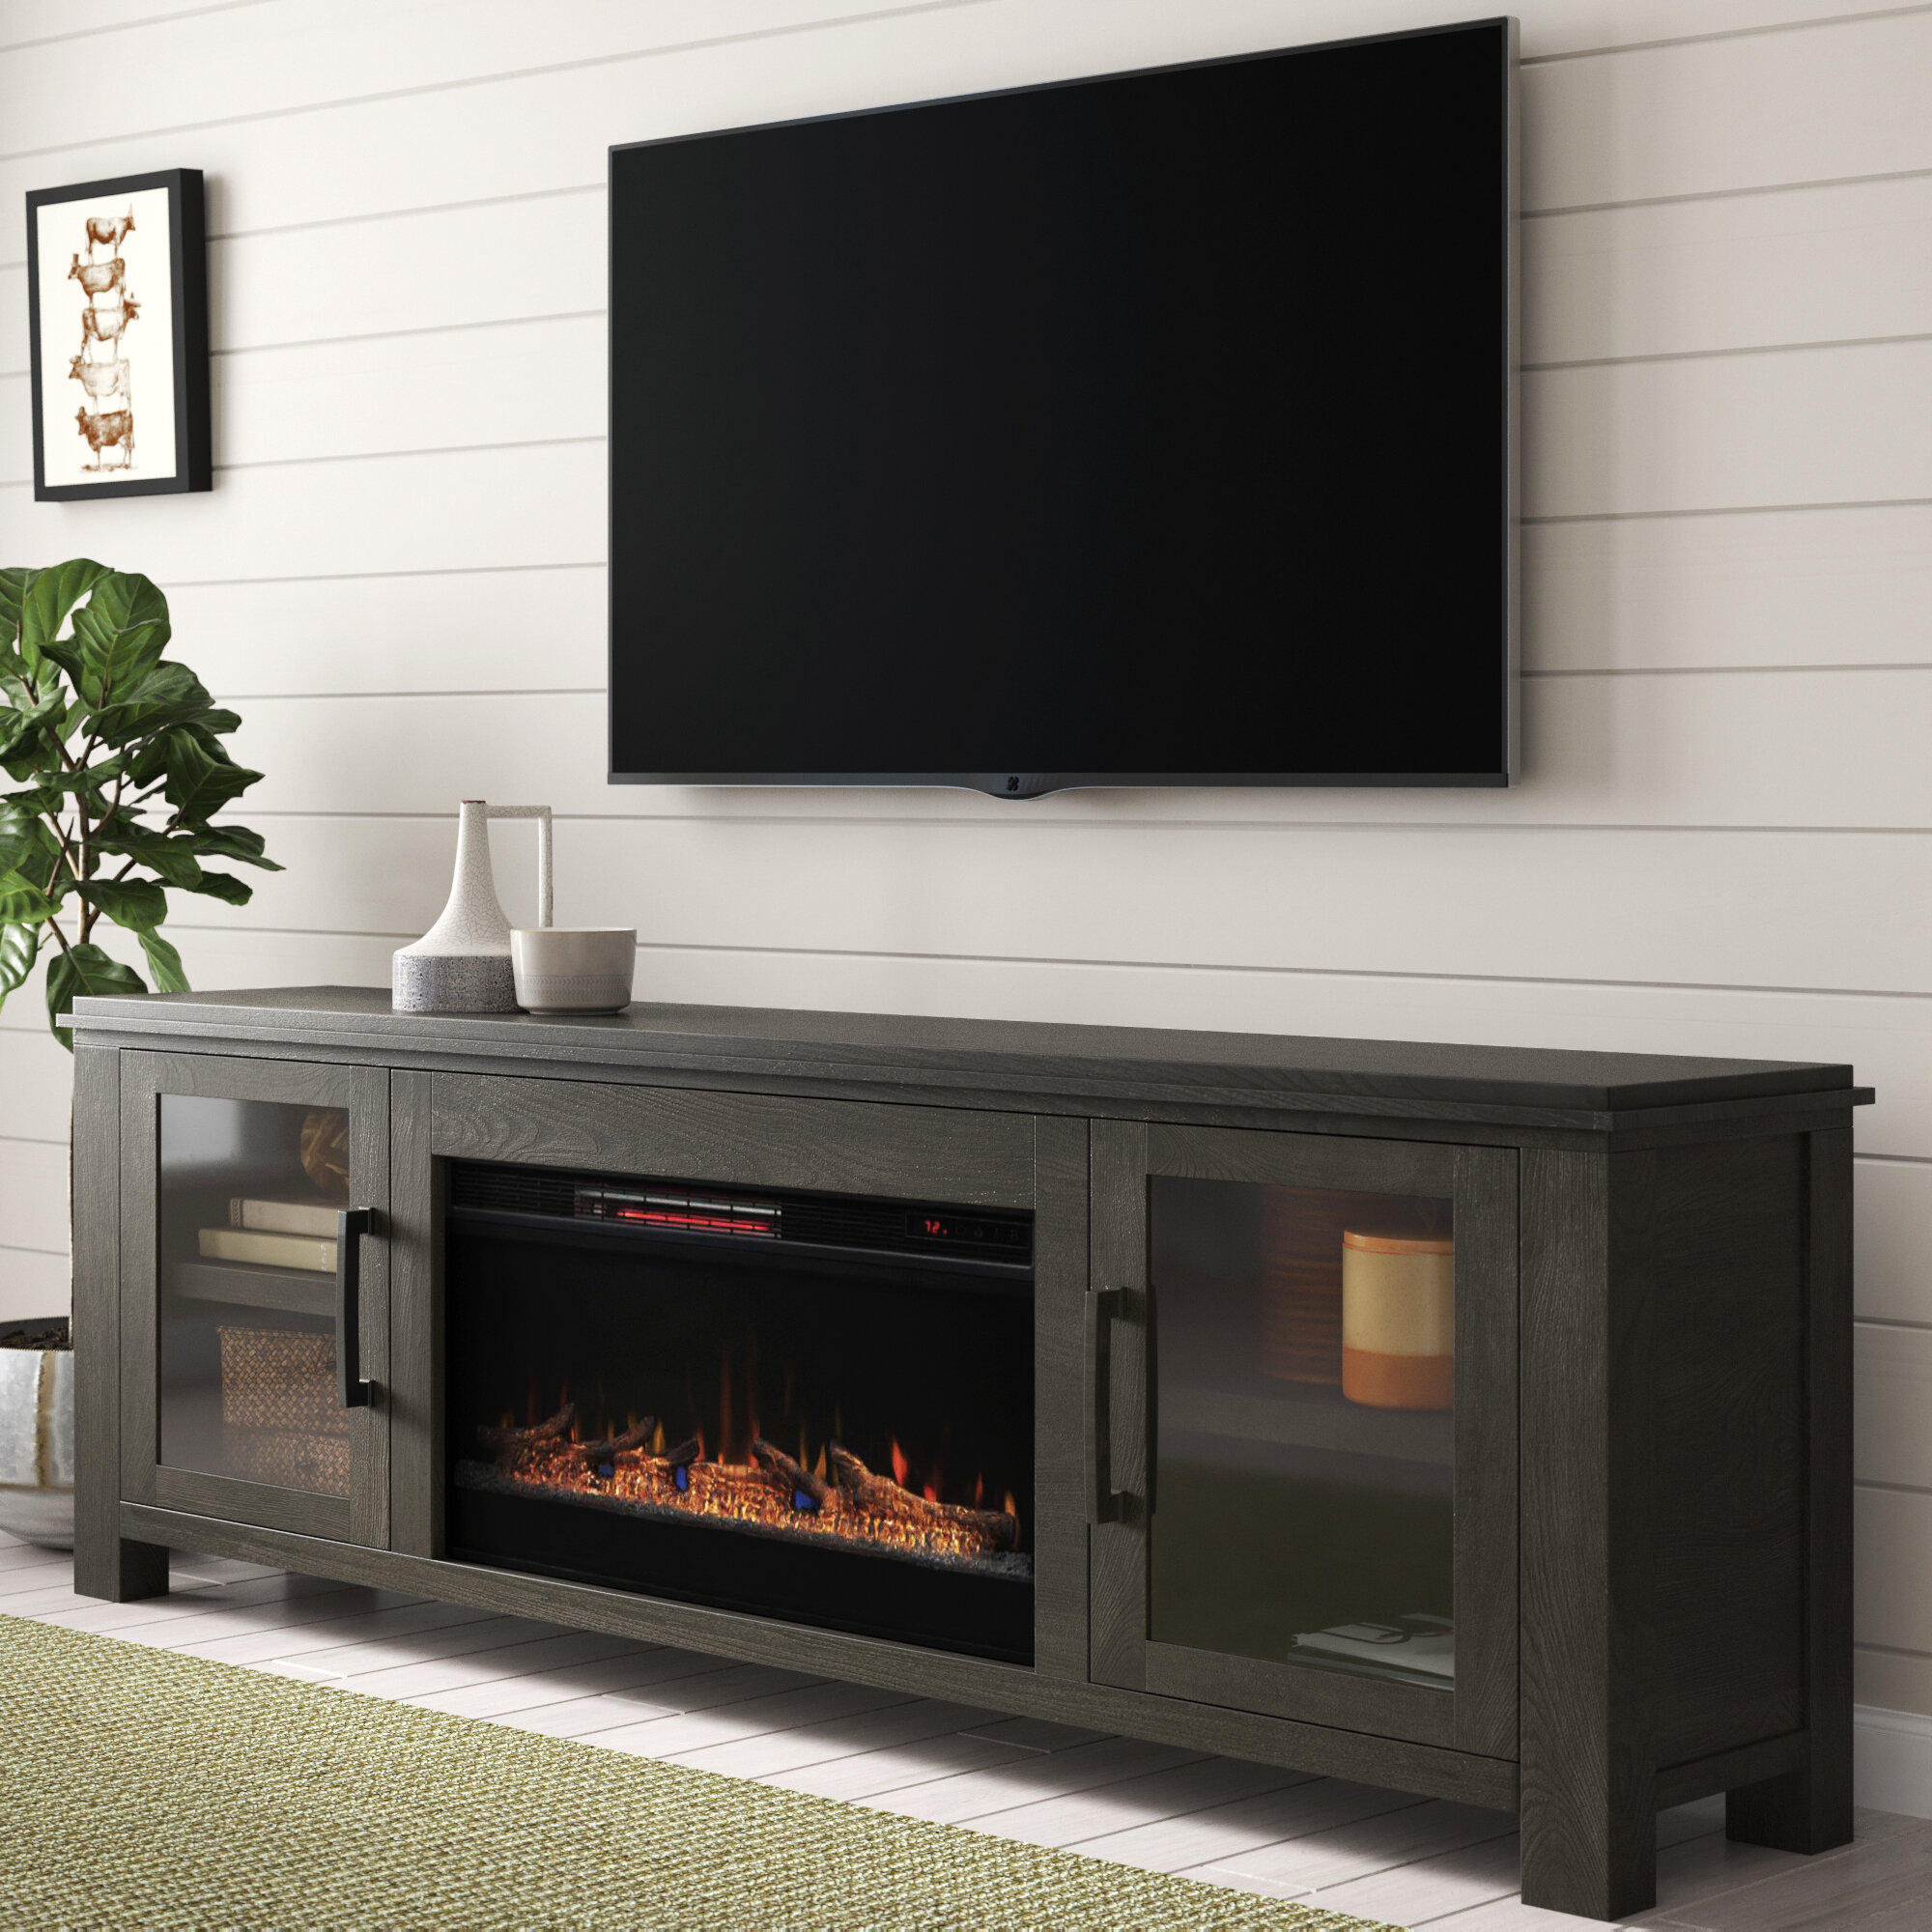 Fireplace Tv Stand Barn Door Beautiful Fireplace Gracie Oaks Tv Stands You Ll Love In 2019